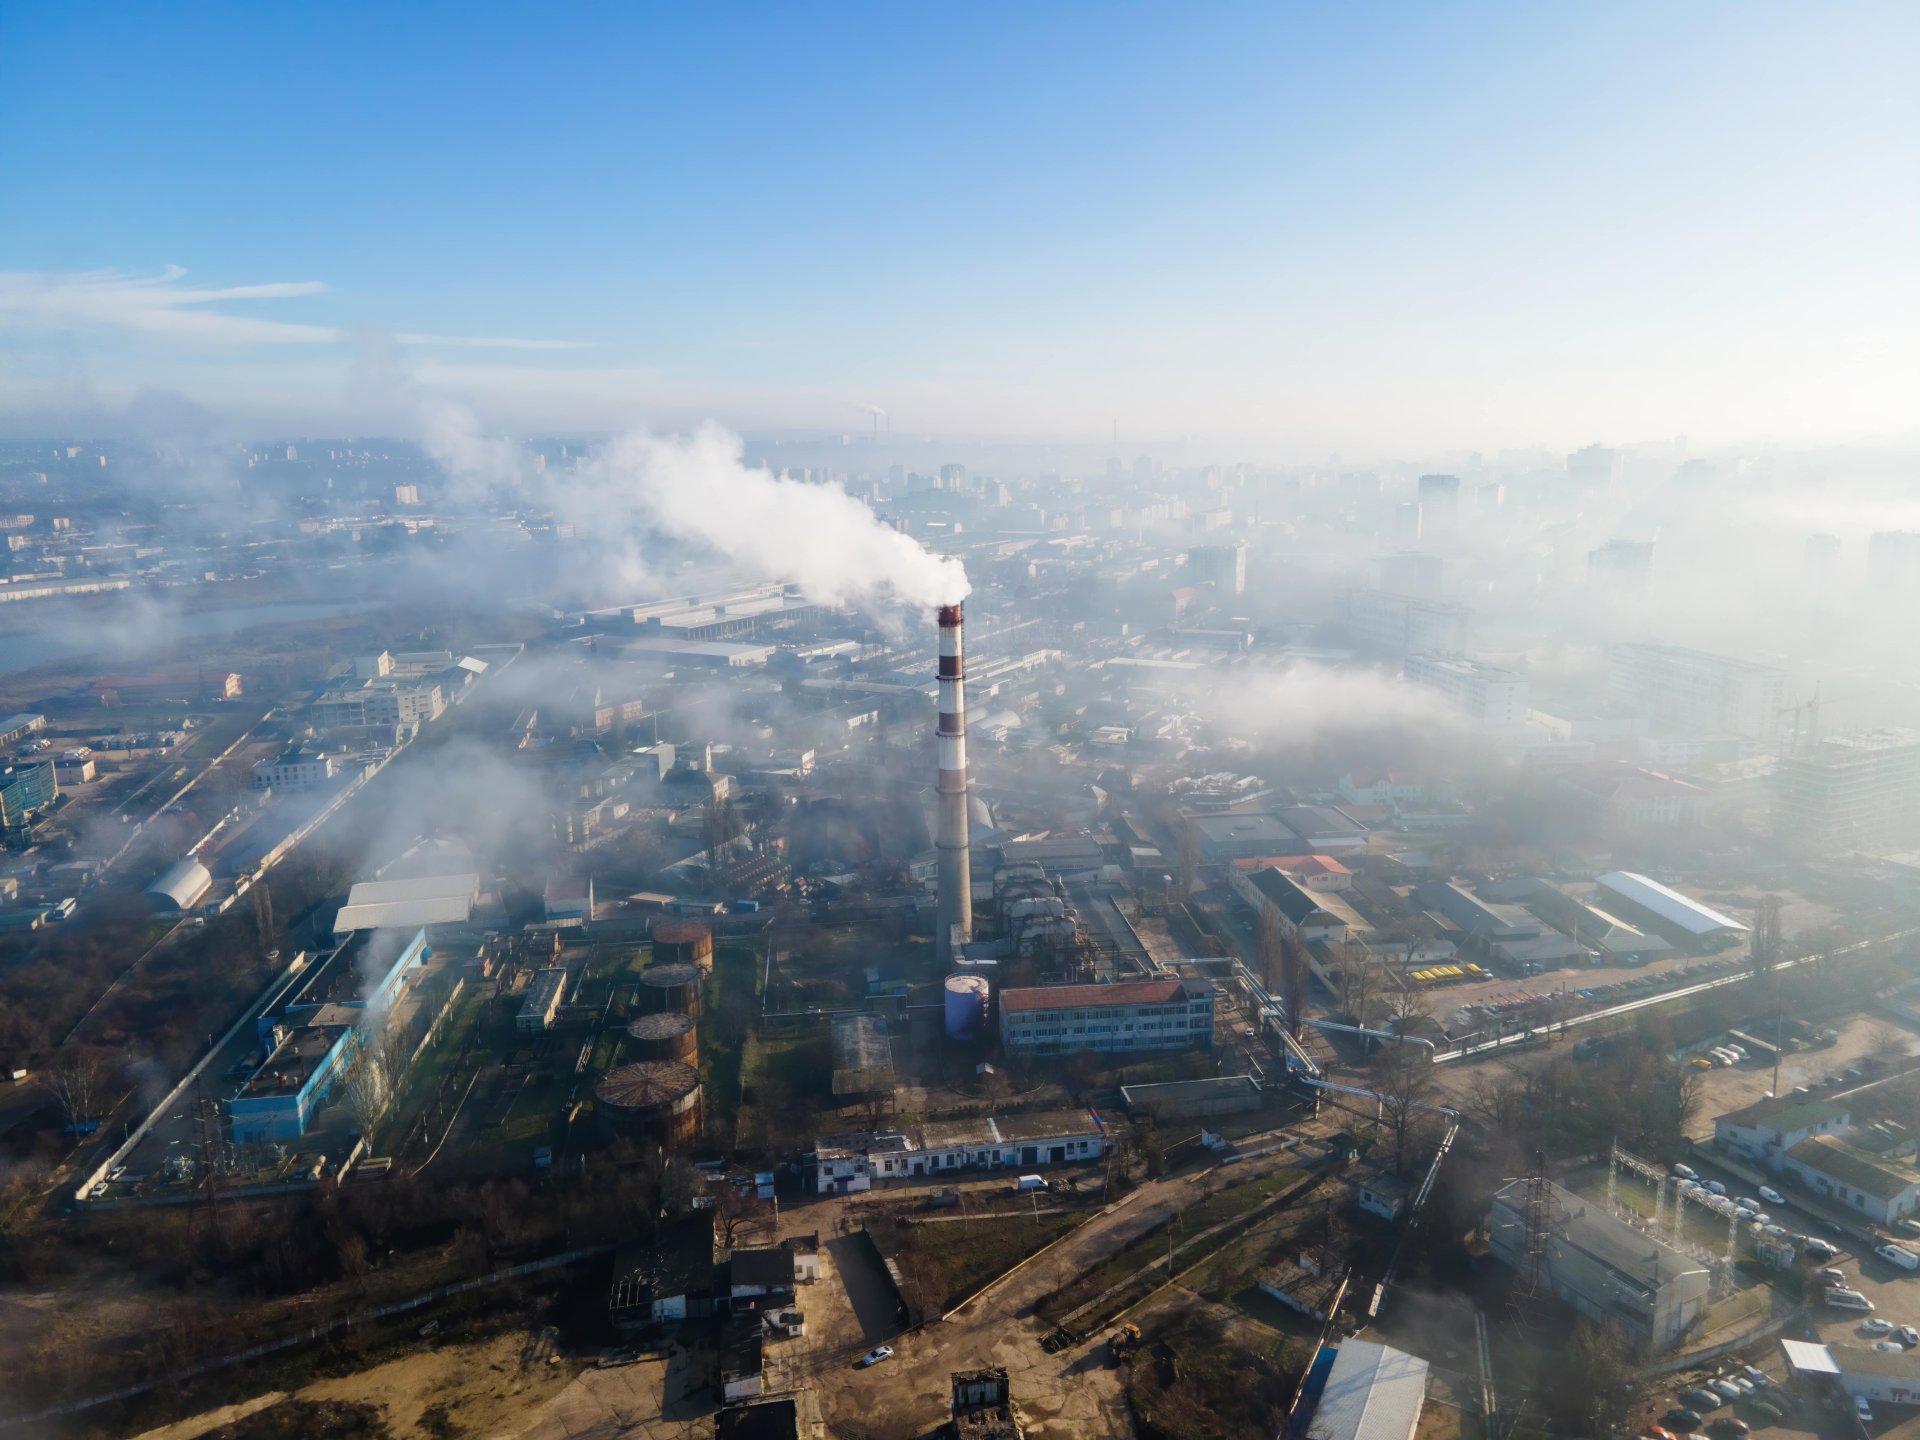 aerial-drone-view-chisinau-thermal-station-with-smoke-coming-out-tube-buildings-roads-fog-air-moldova-min.jpg